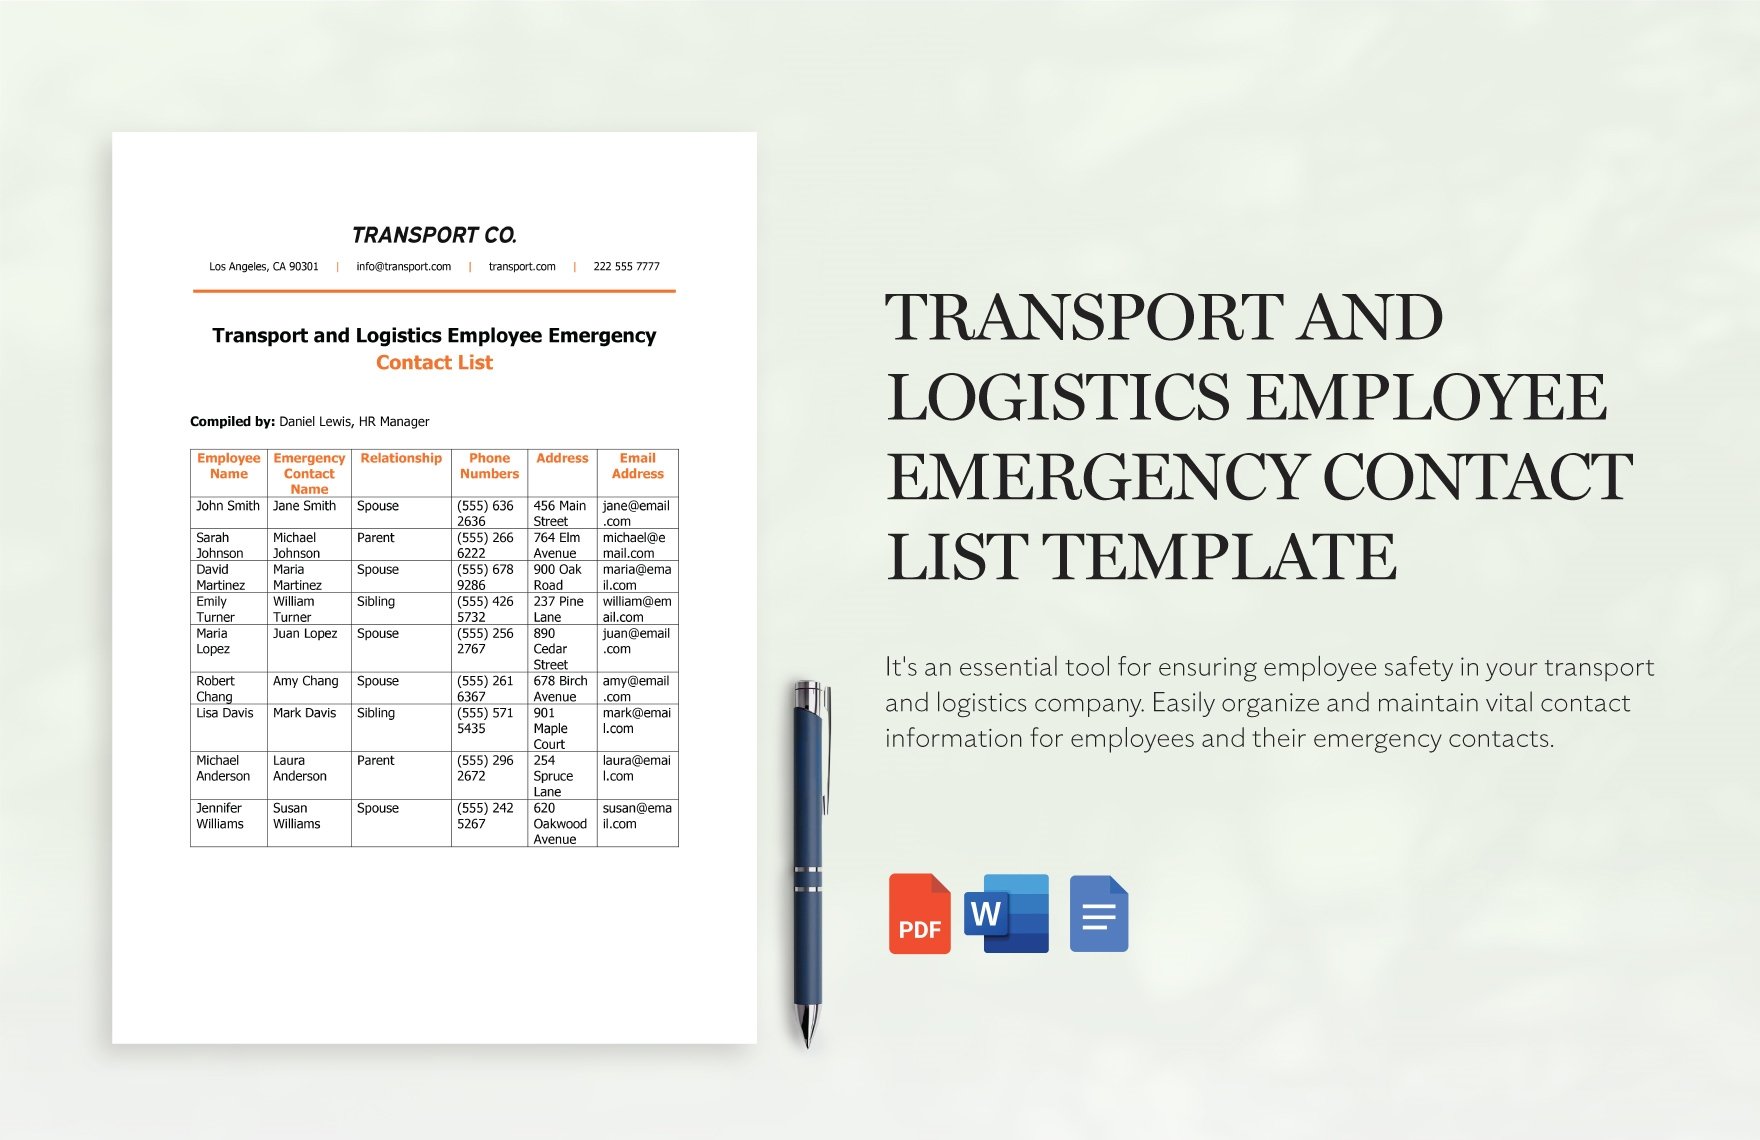 Transport and Logistics Employee Emergency Contact List Template